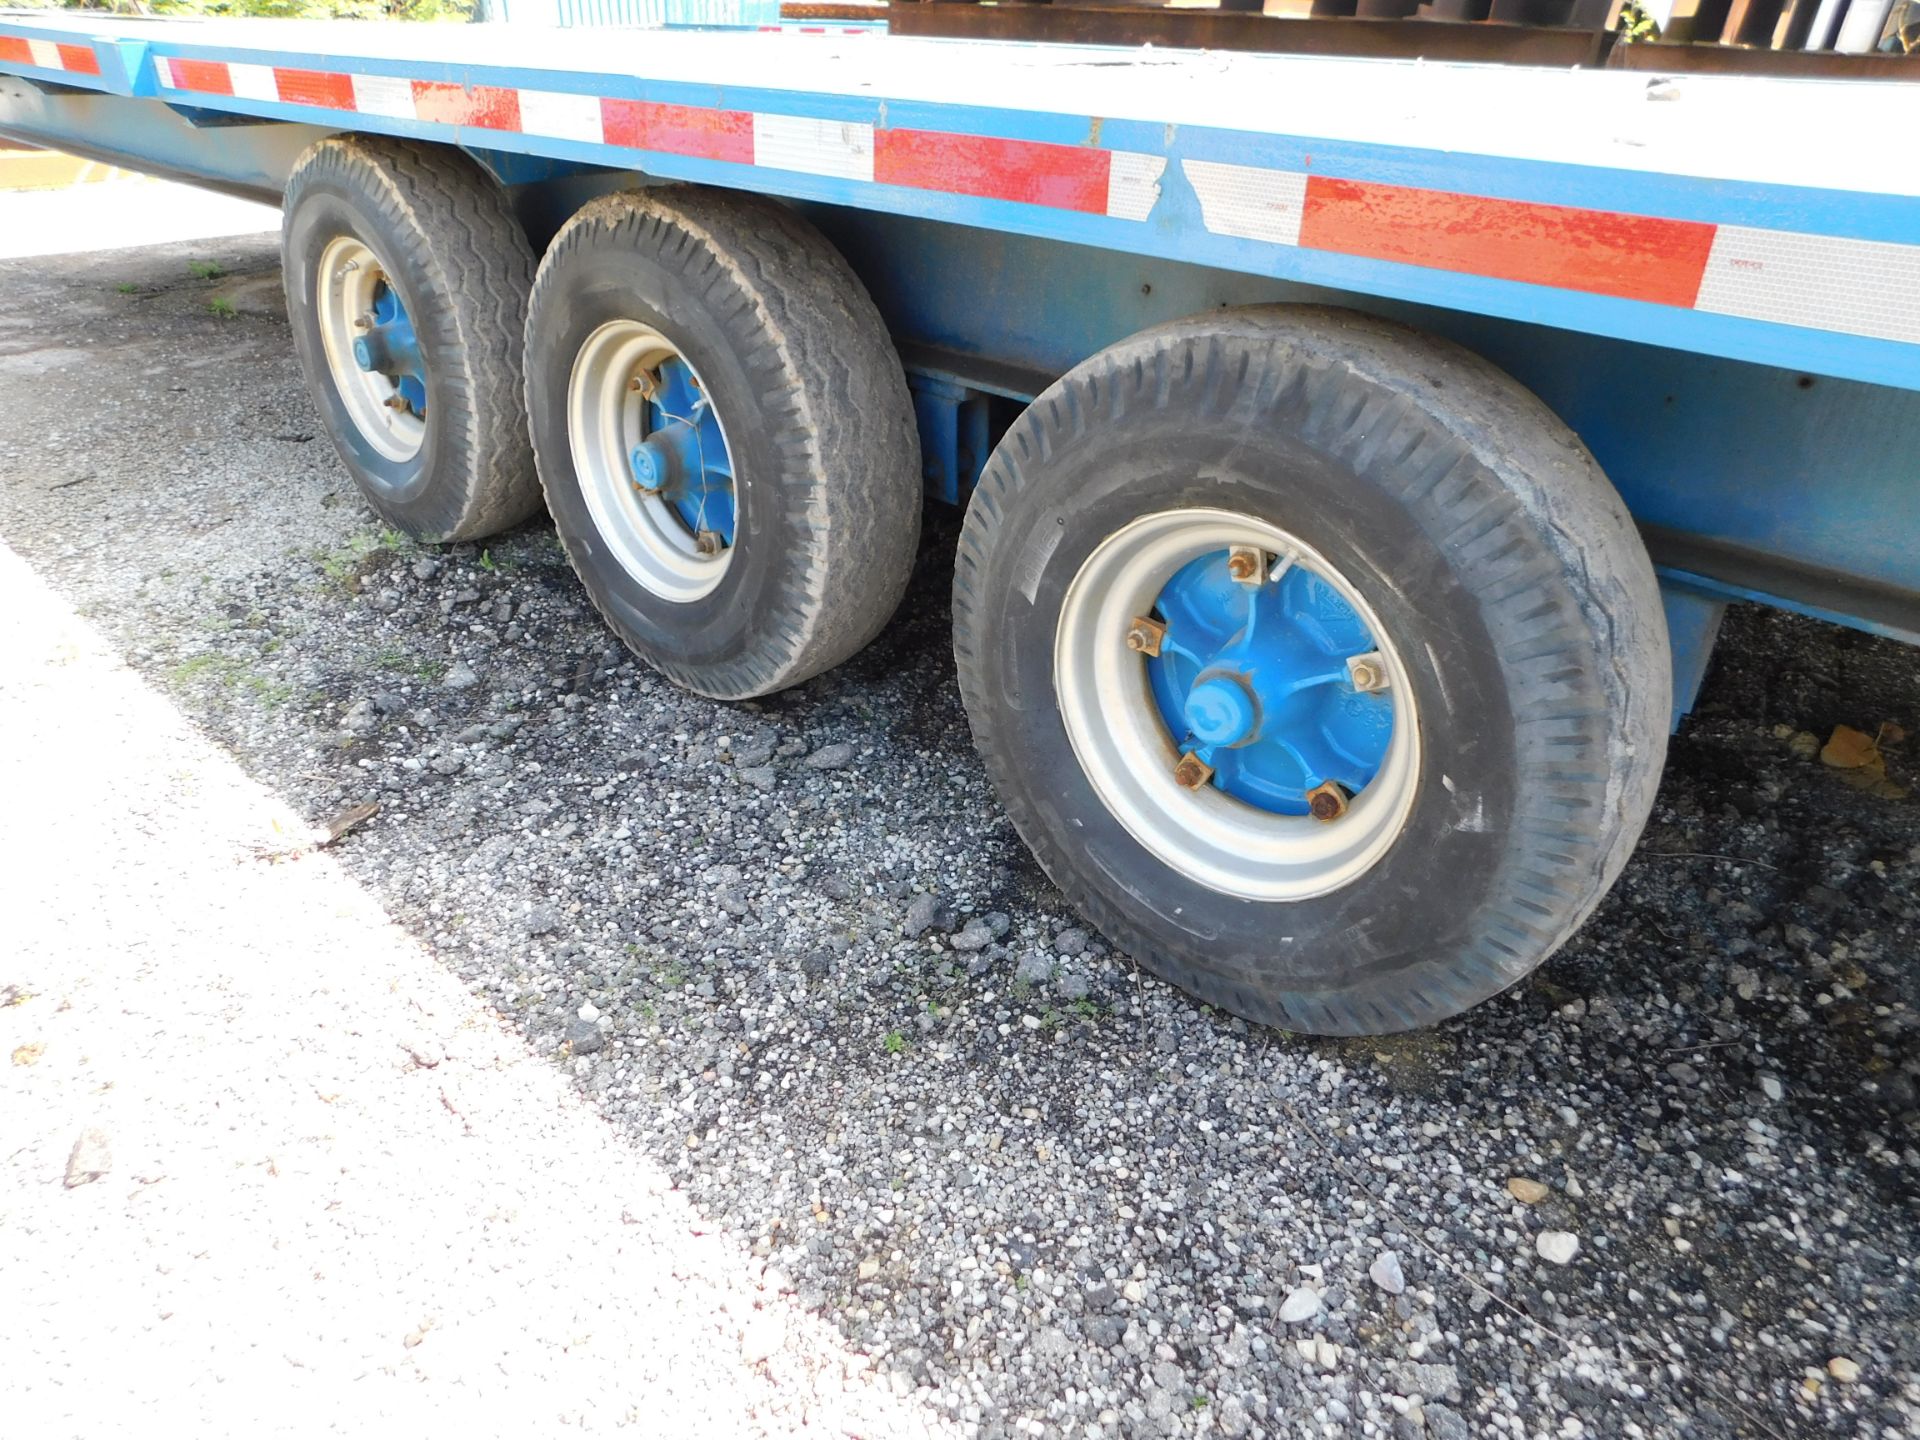 8' x 40' Flat Bed Tongue Pull Trailer, Wood Deck, Tri-Axle, 6-Wheels, Pintle Hitch - Image 3 of 13